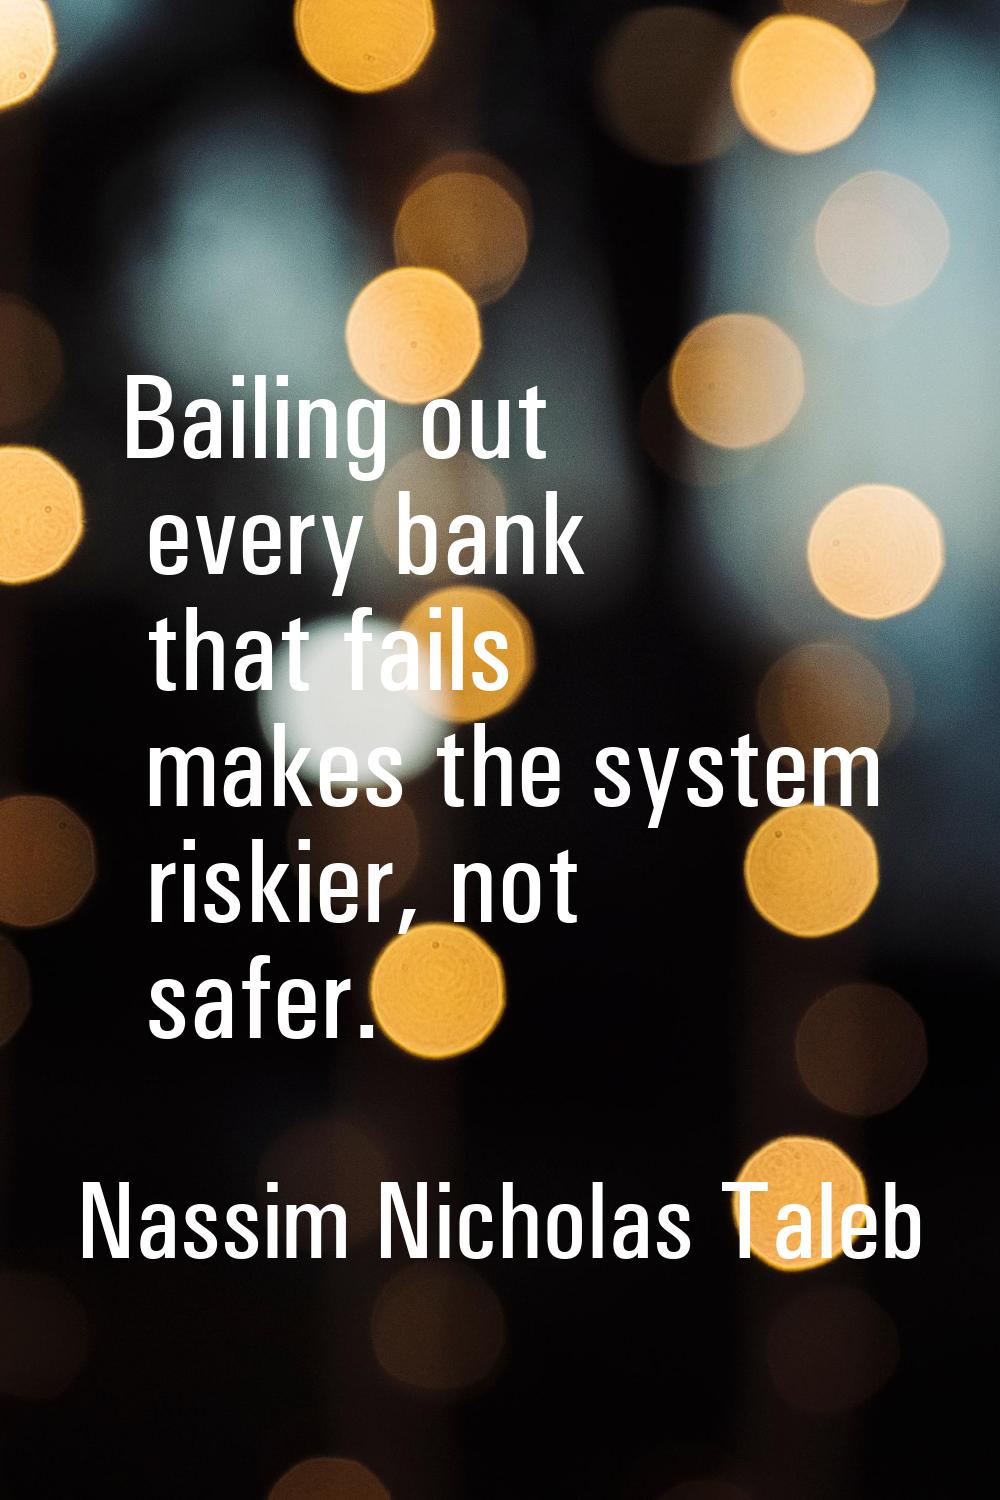 Bailing out every bank that fails makes the system riskier, not safer.